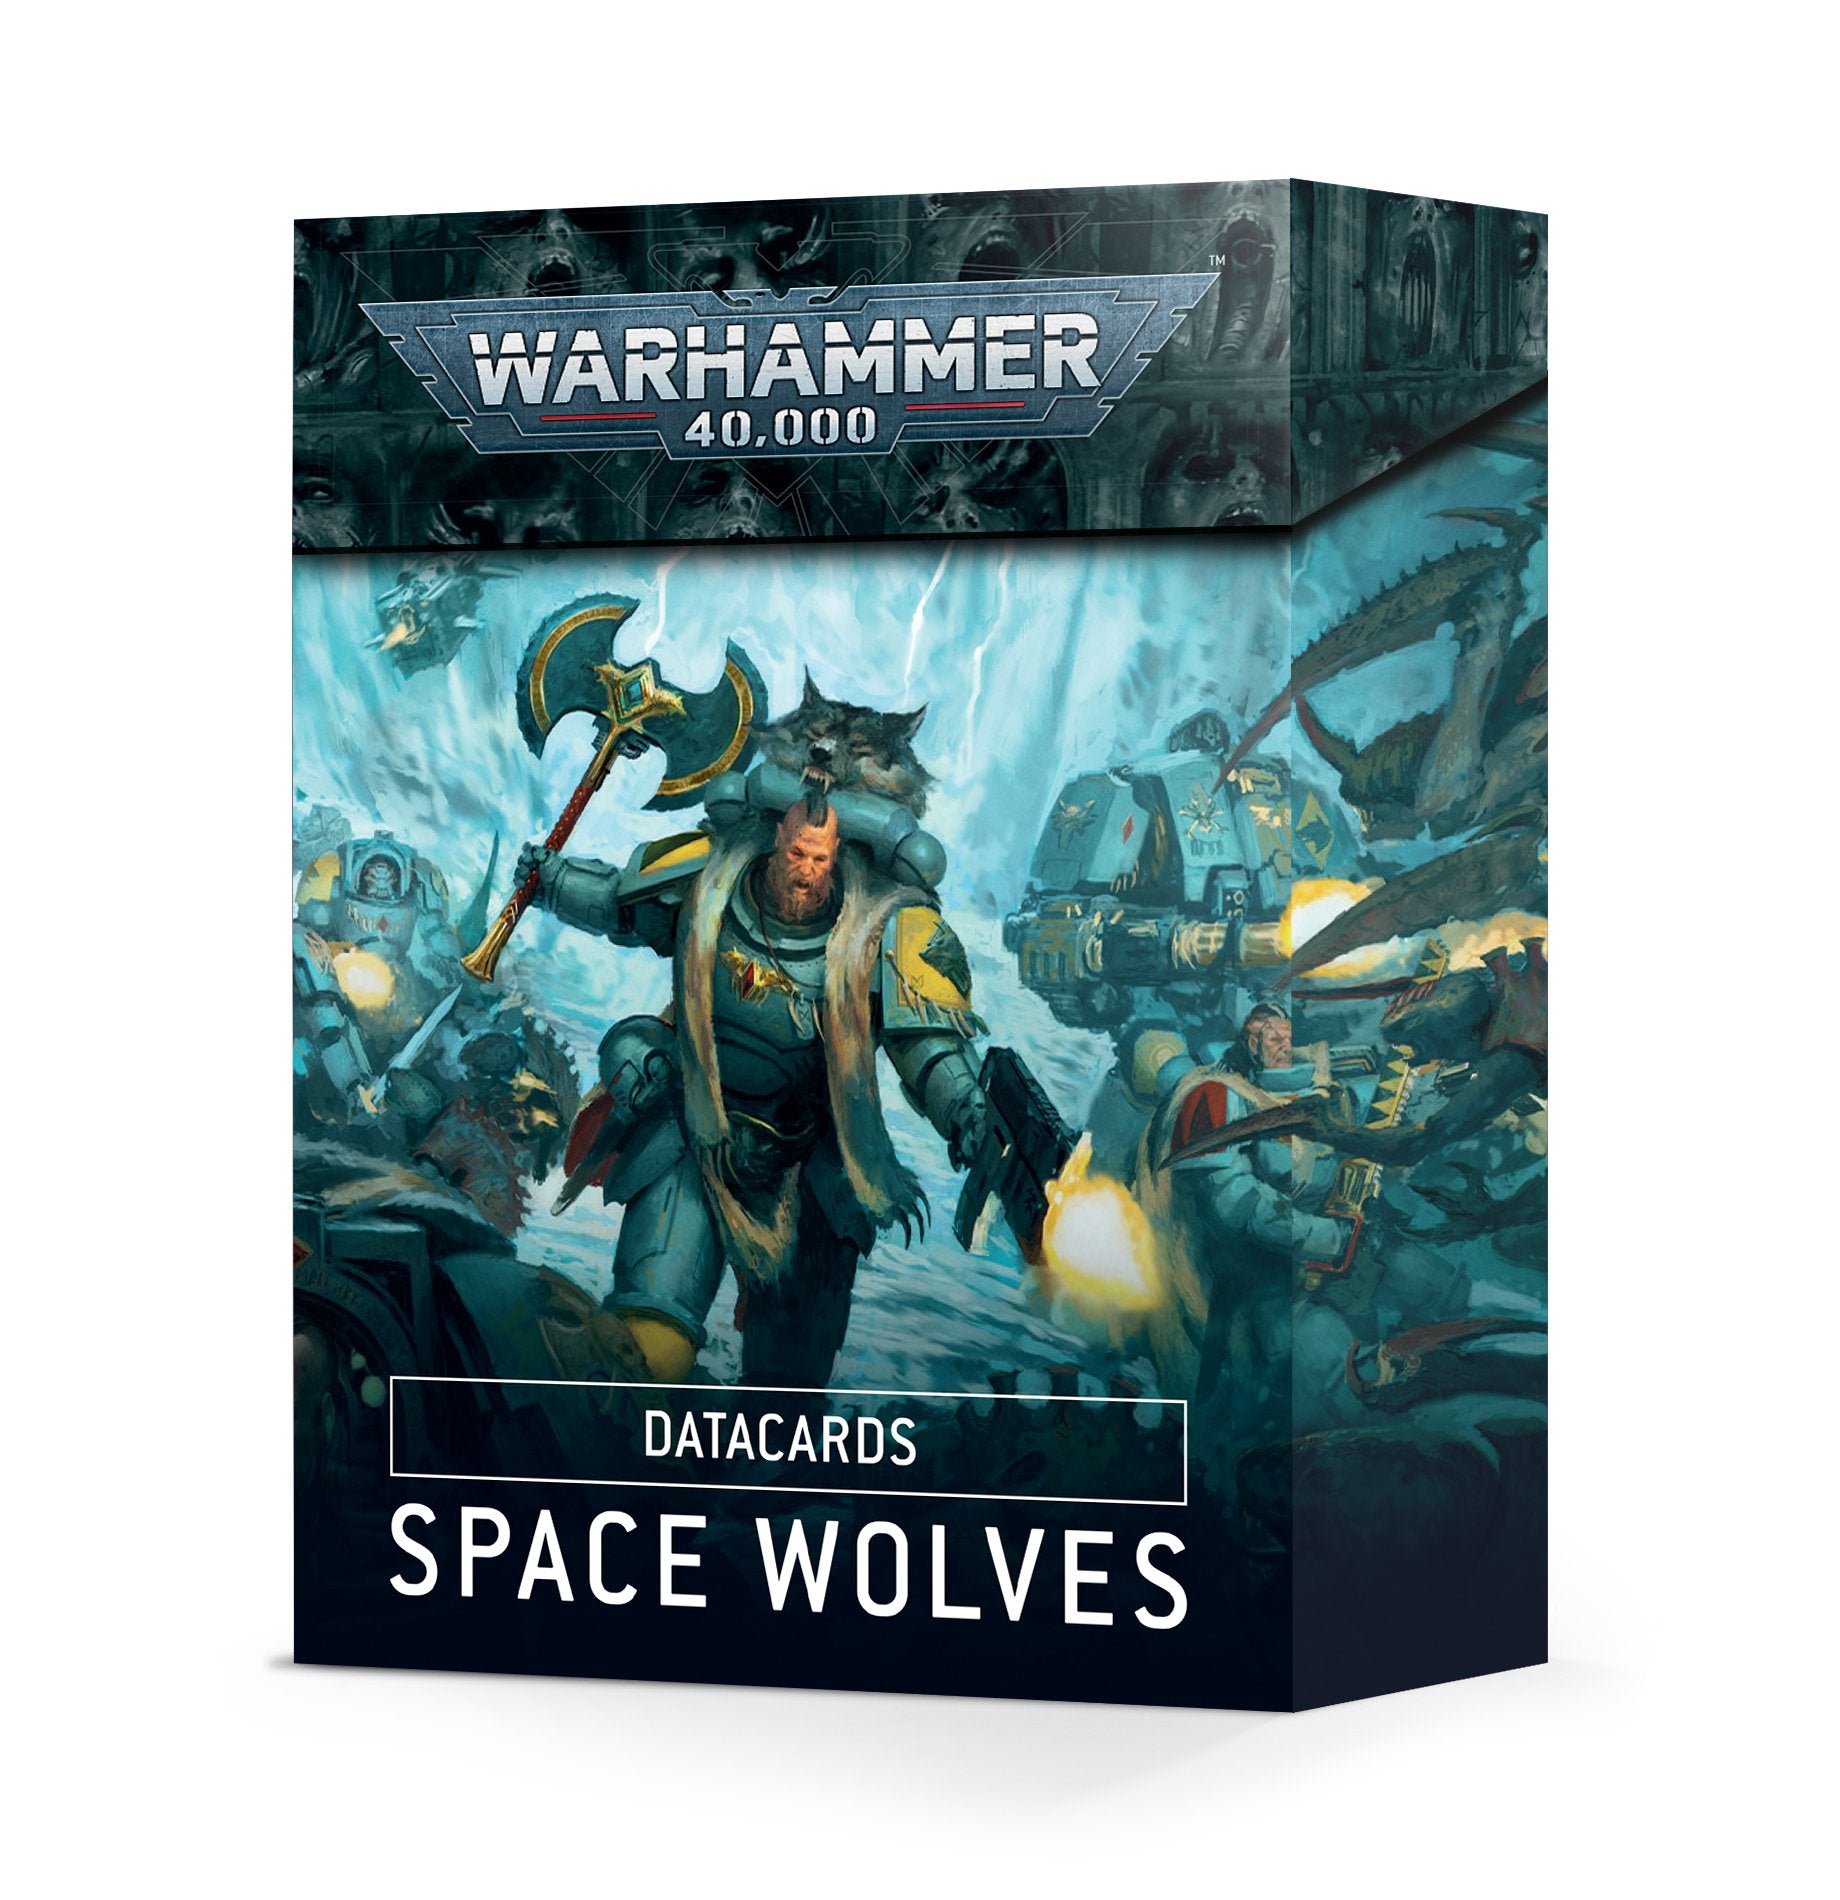 DATACARDS: SPACE WOLVES (2020) [ENG] | BD Cosmos